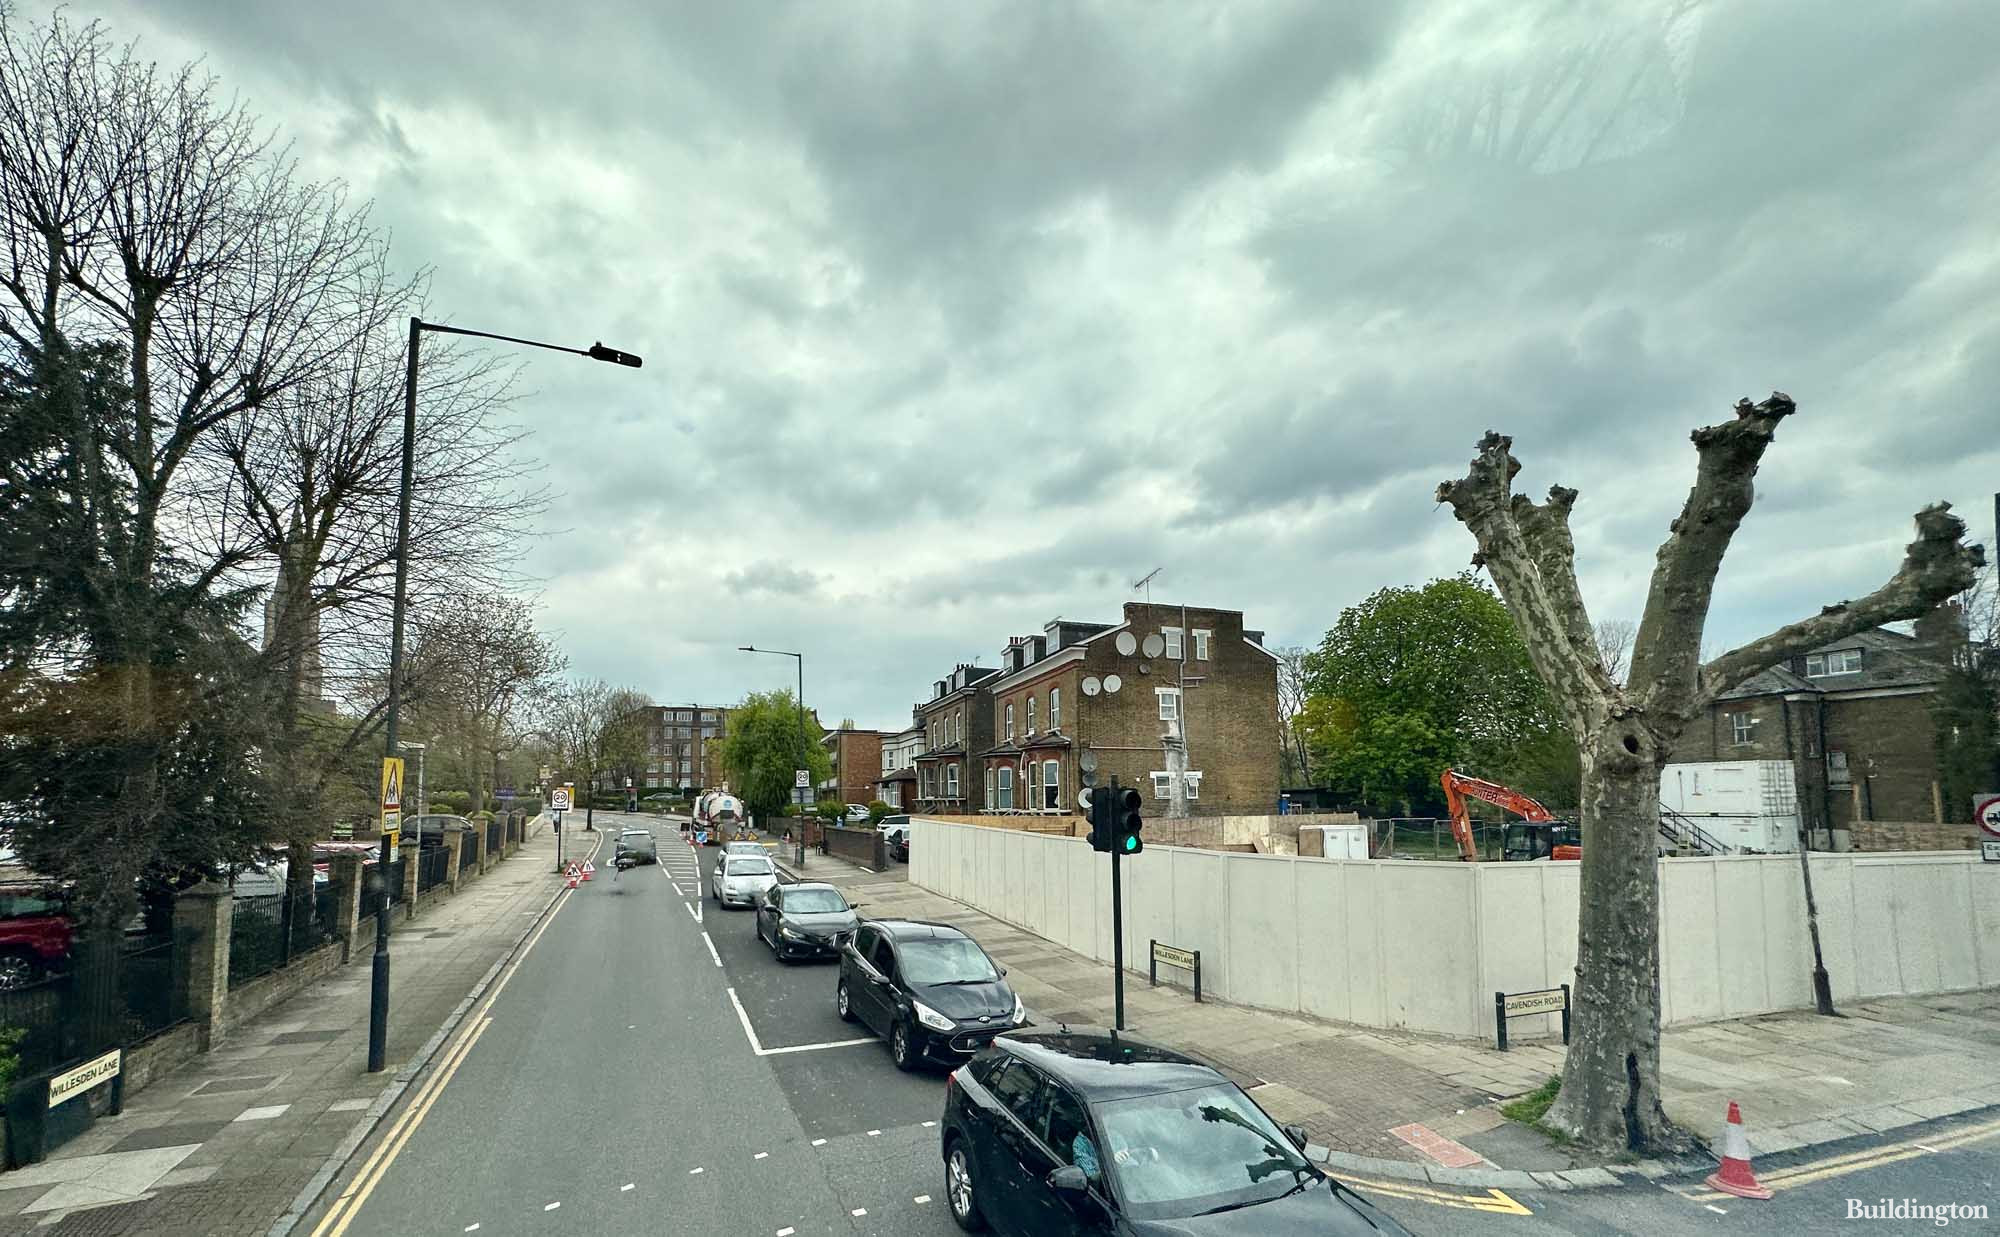 New residential development on the corner of 162 Willesden Lane and Cavendish Road in London NW3.